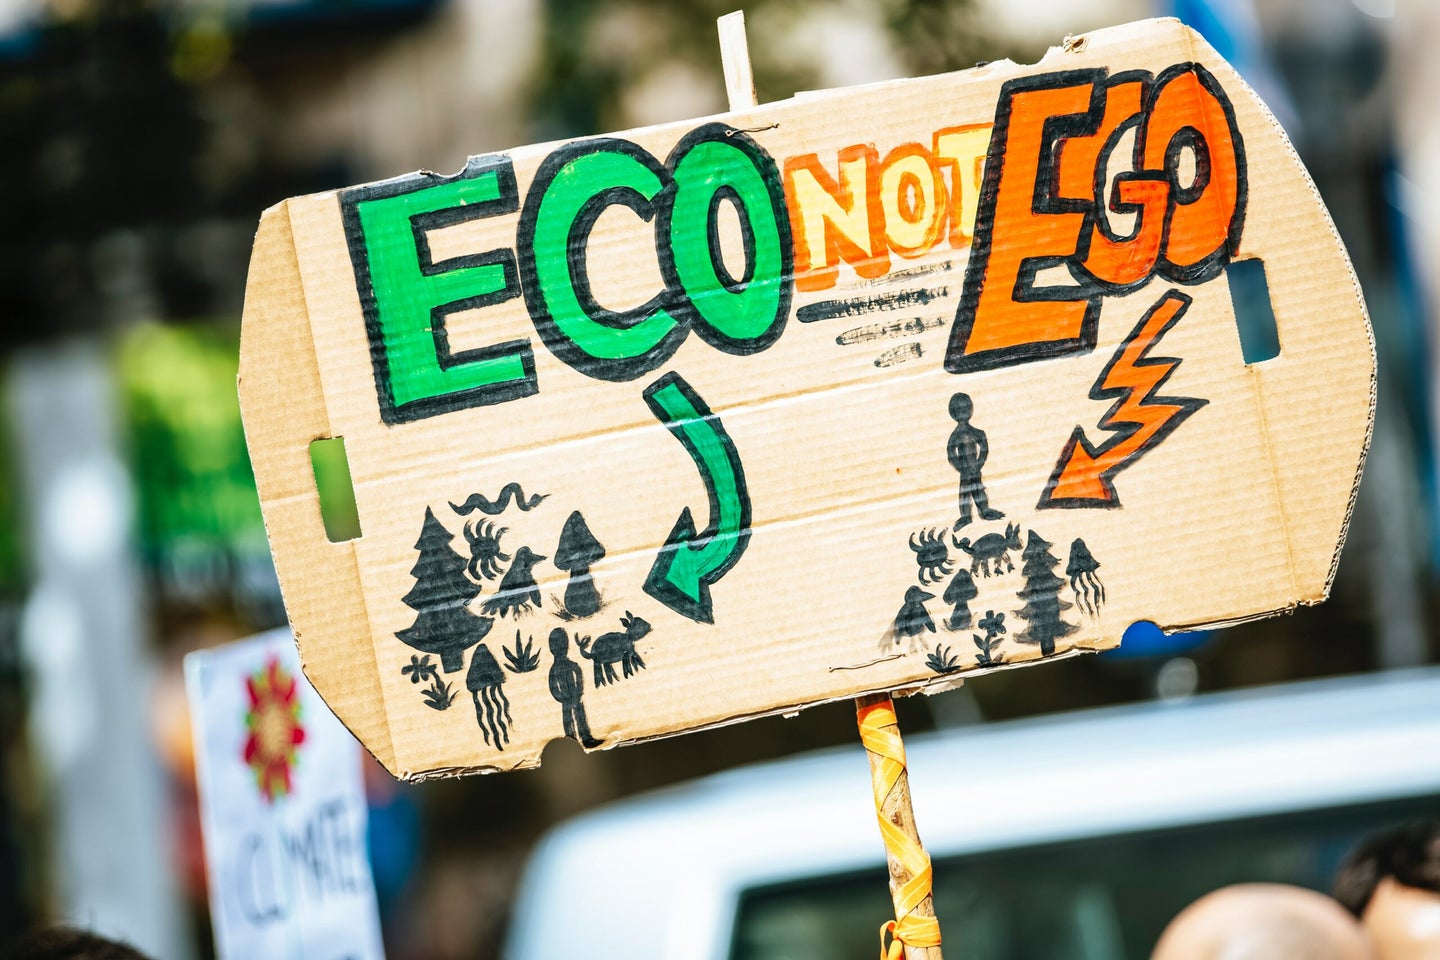 Legal experts have been pushing for recognition of ecocide for decades.